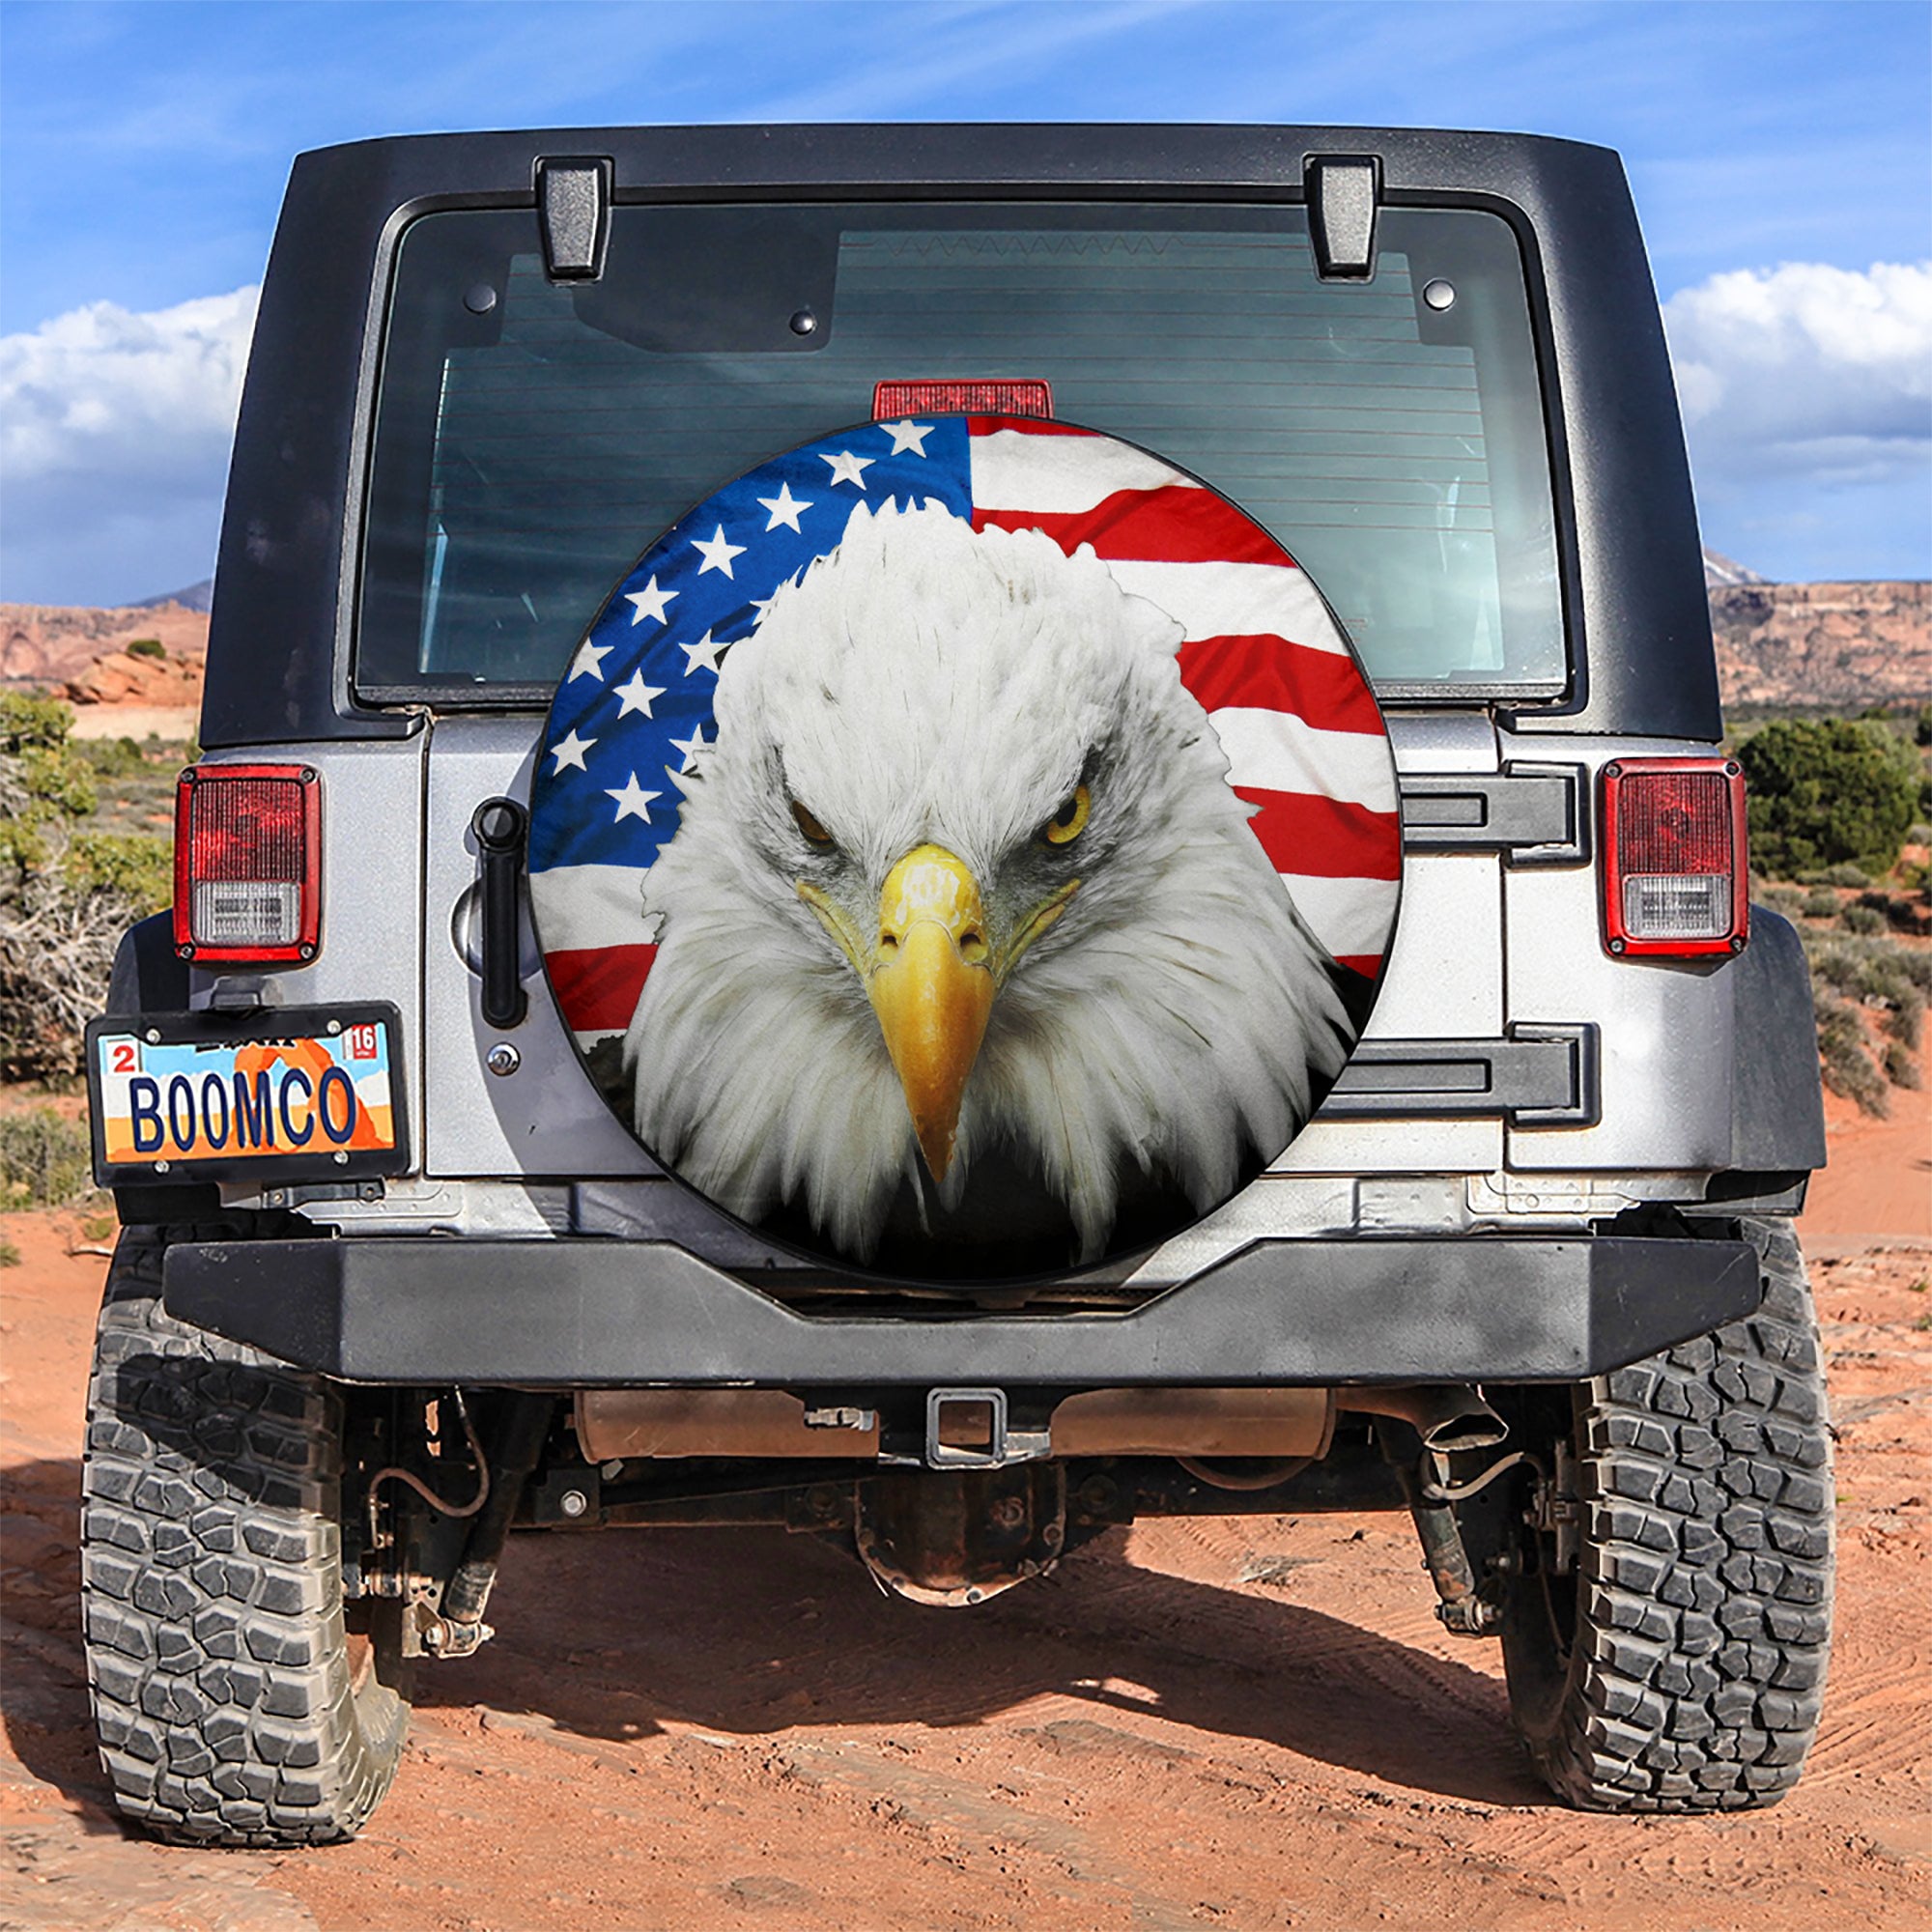 Eagle US Flag Car Spare Tire Covers Gift For Campers Nearkii